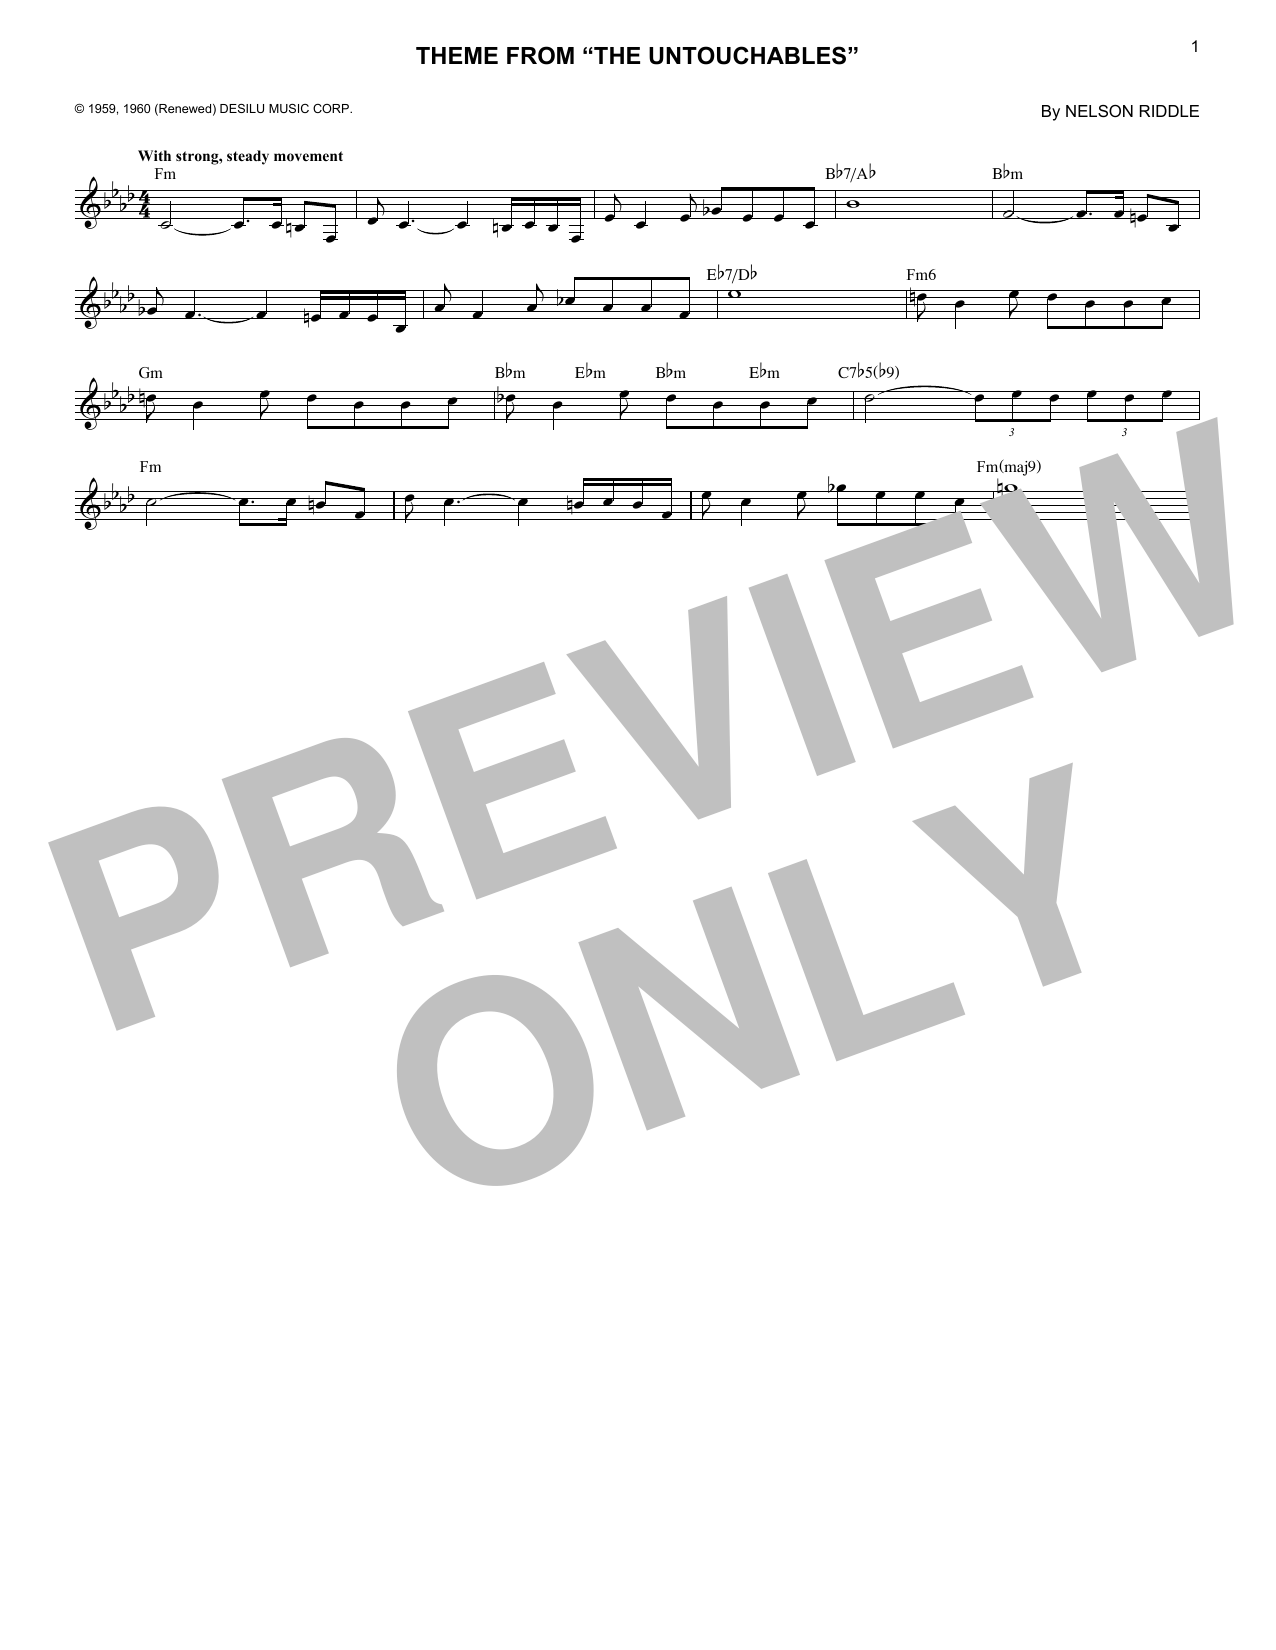 Download Nelson Riddle Theme From 